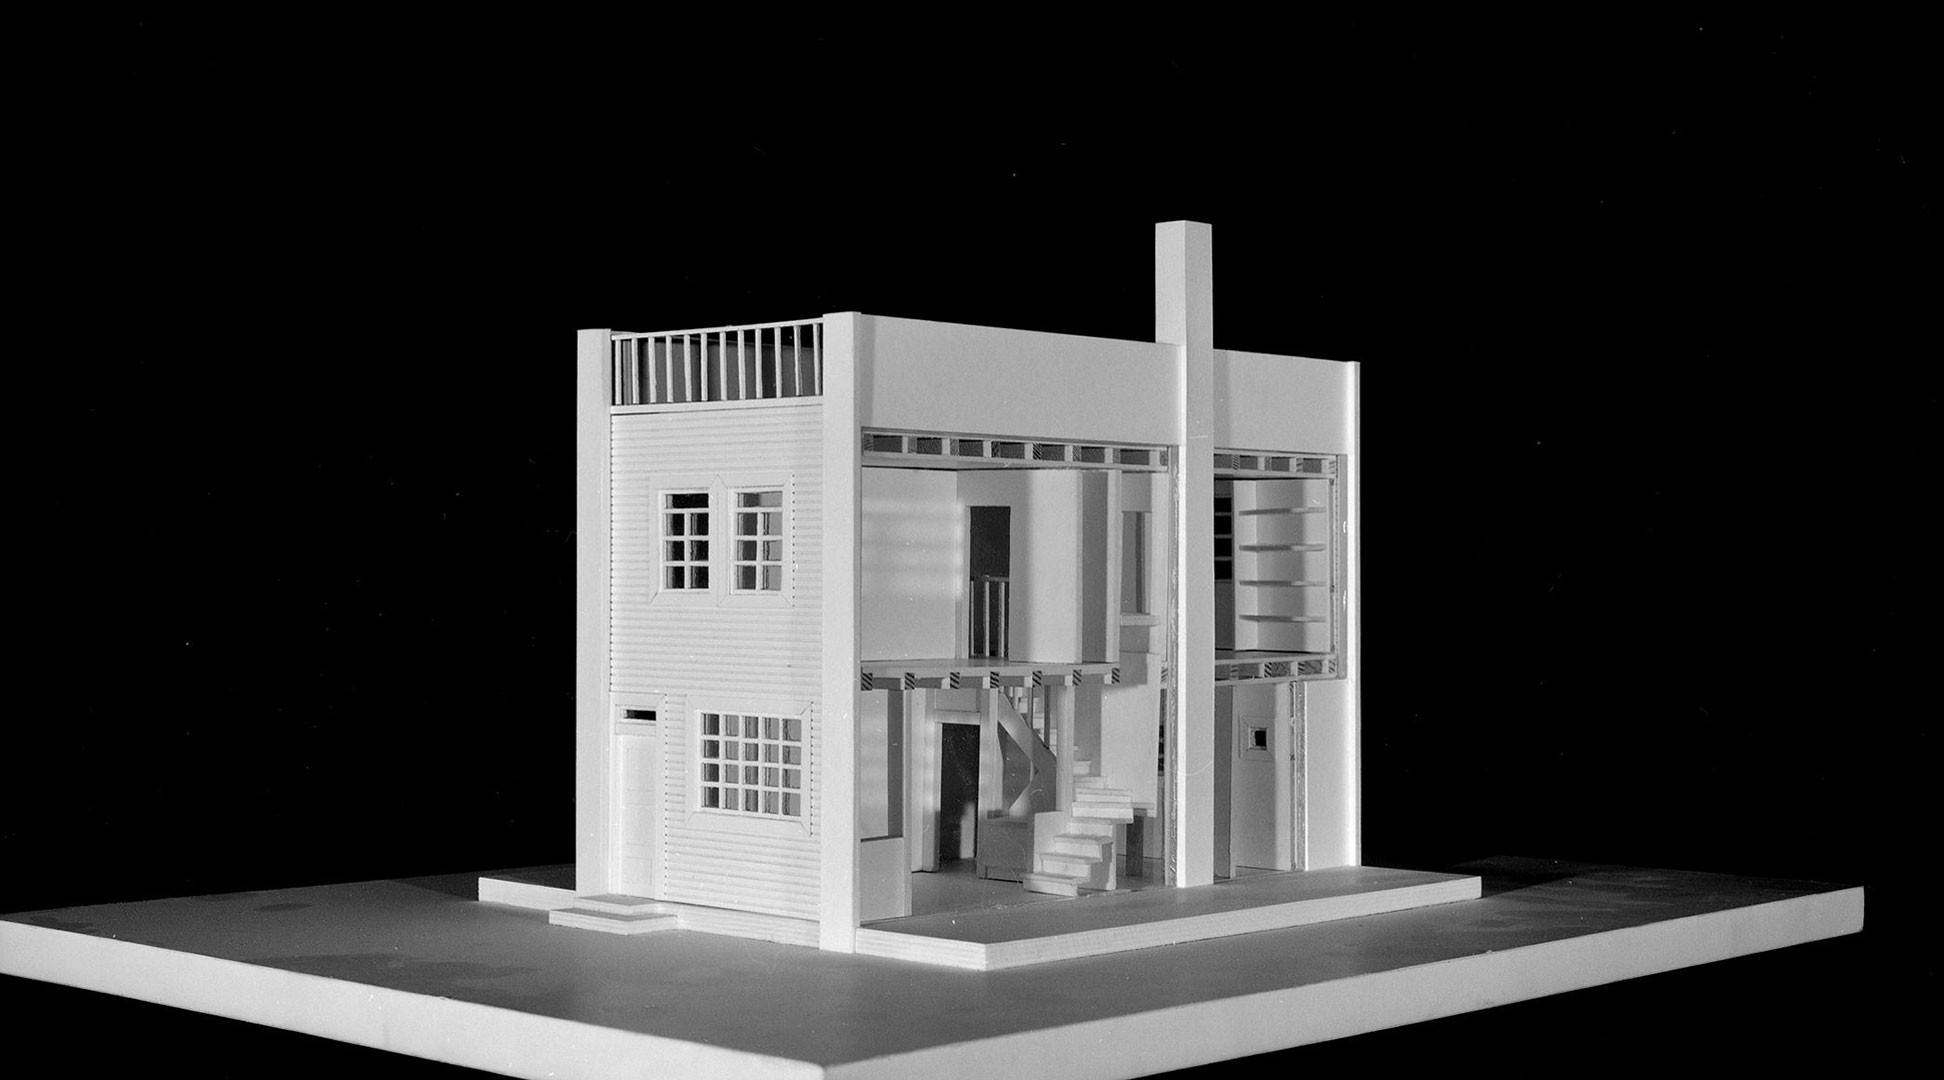 <BODY><div><div>Adolf Loos, House with One Wall, Vienna (project for the development on the Heuberg in Vienna’s 17th district, Röntgengasse 138), 1921</div><div>Model: Klaus Hagenauer, TU Wien, research units Building Construction and Design (Prof. Hans Puchhammer) and Three-Dimensional Design and Model Making (Prof. František Lesák), 1978–1994</div><div>© ALBERTINA, Vienna</div><div> </div></div><br /></BODY>